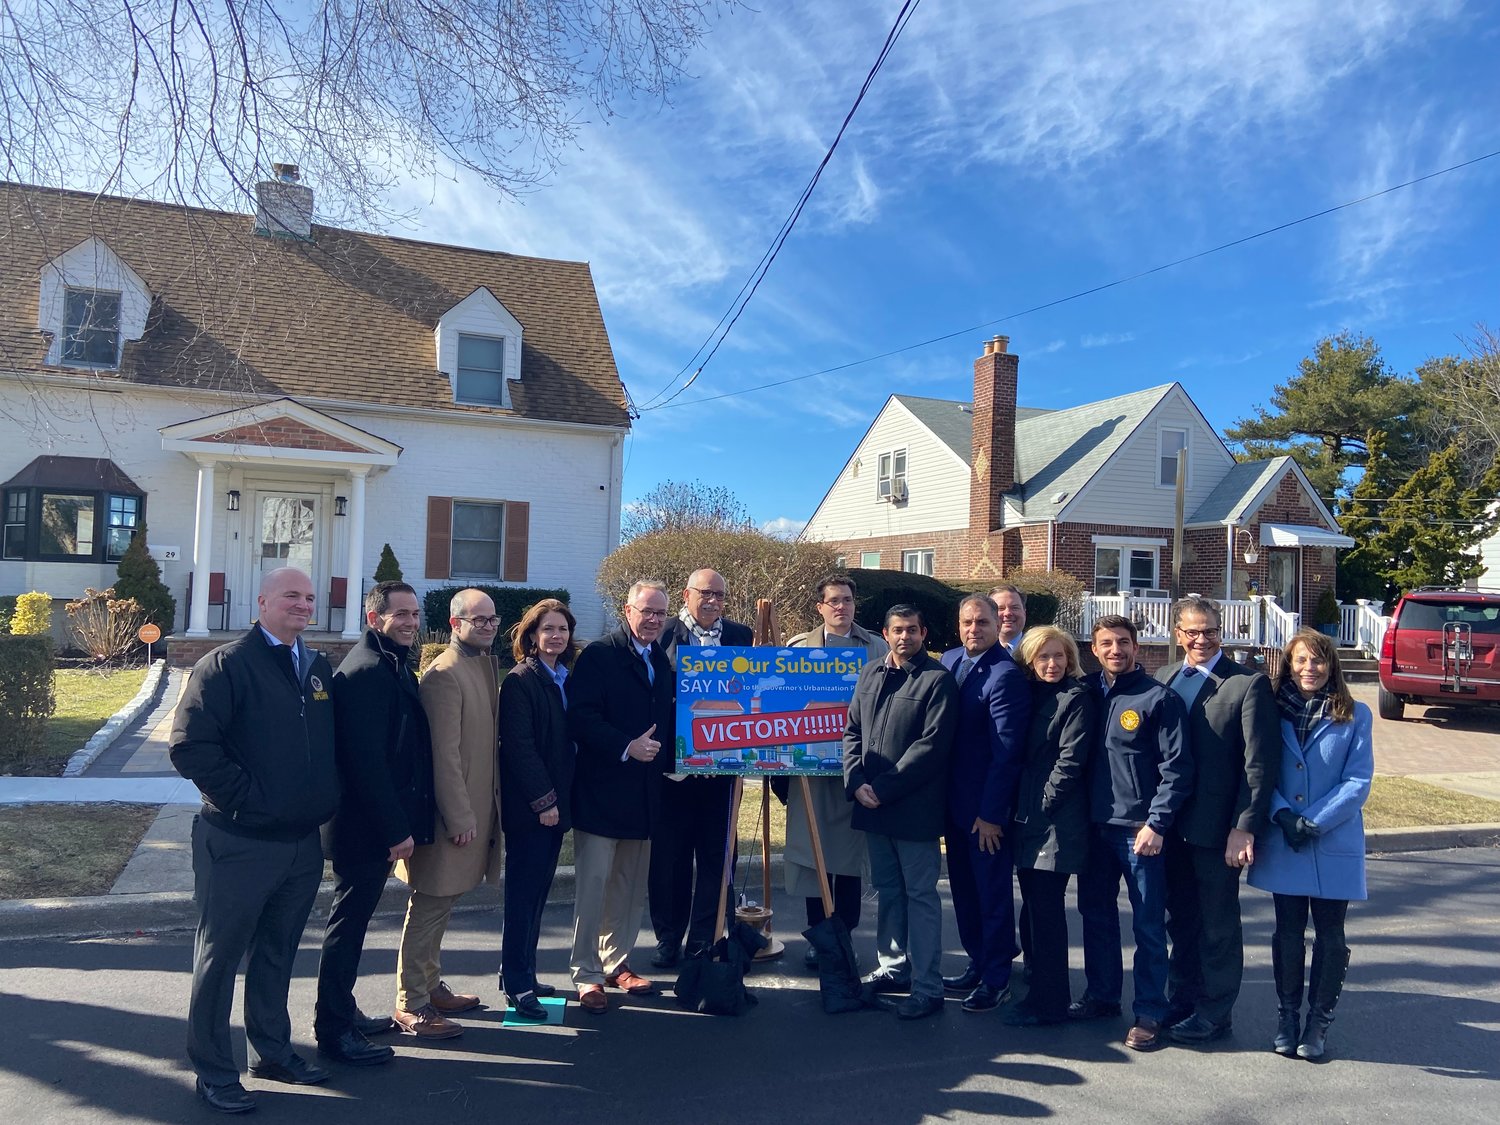 Officials, including those from the Town of Oyster Bay, gathered to celebrate Gov. Kathy Hochul’s decision to remove the single-family zoning proposal from her 2022-2023 budget.